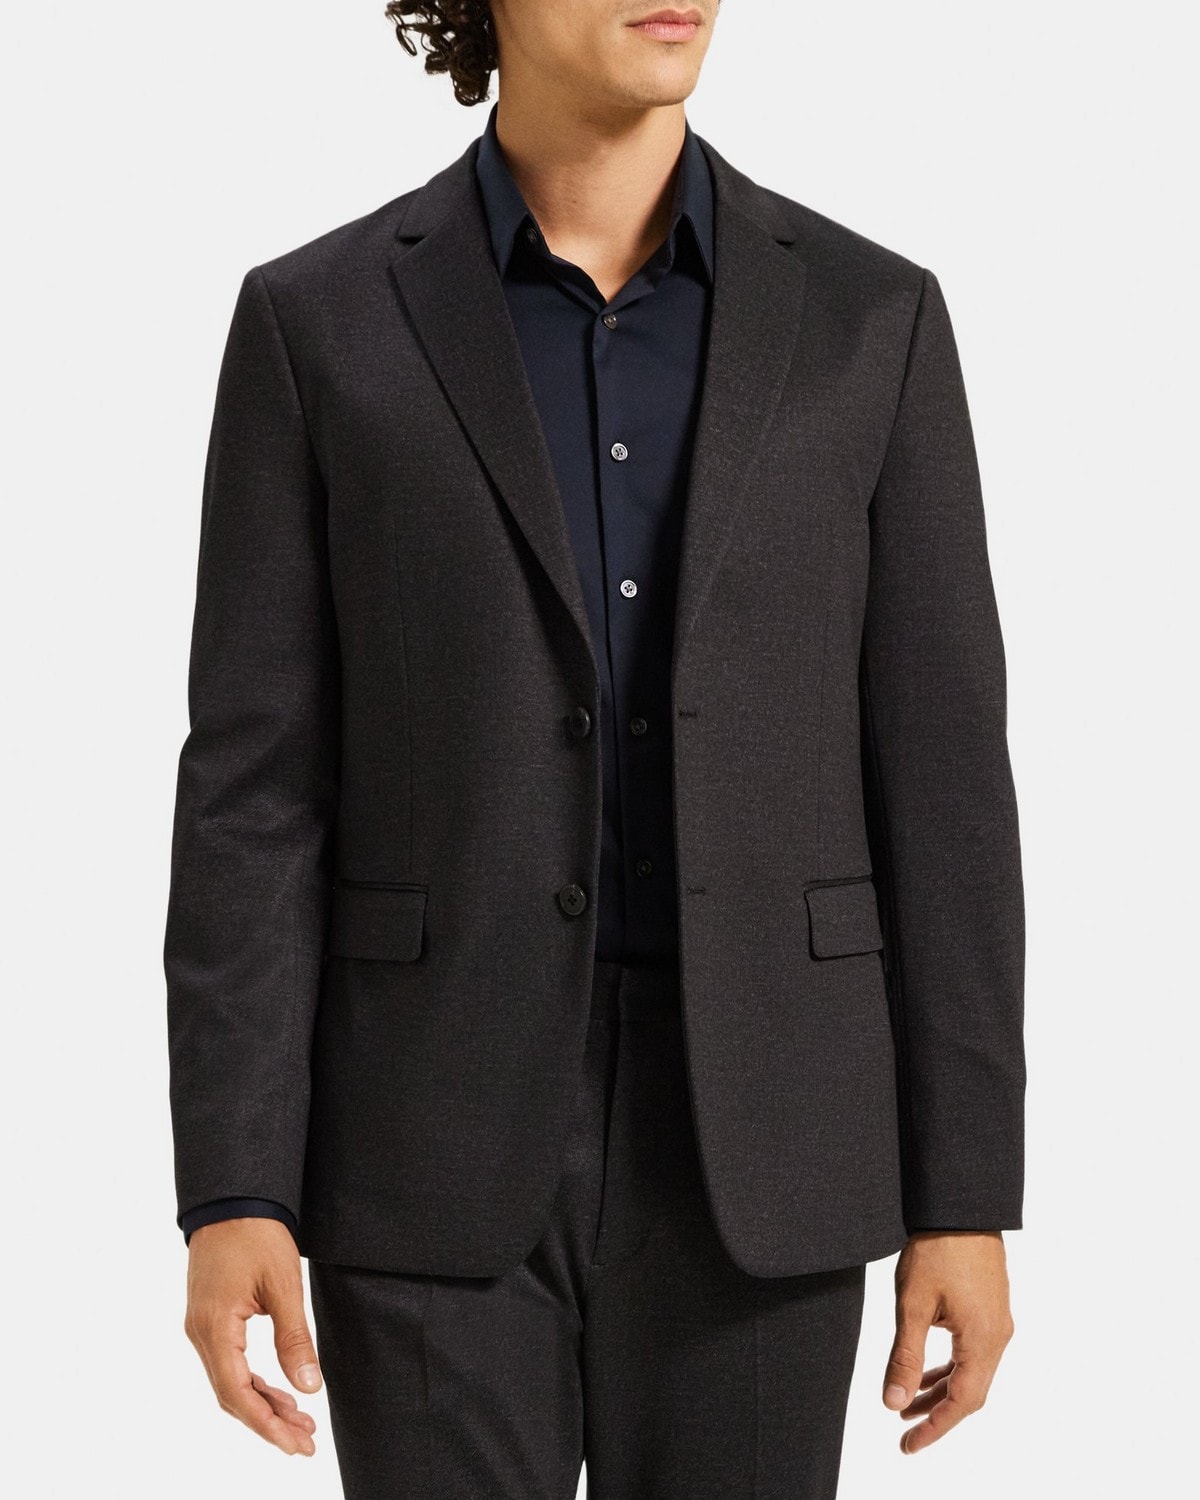 Unstructured Suit Jacket in Knit Twill